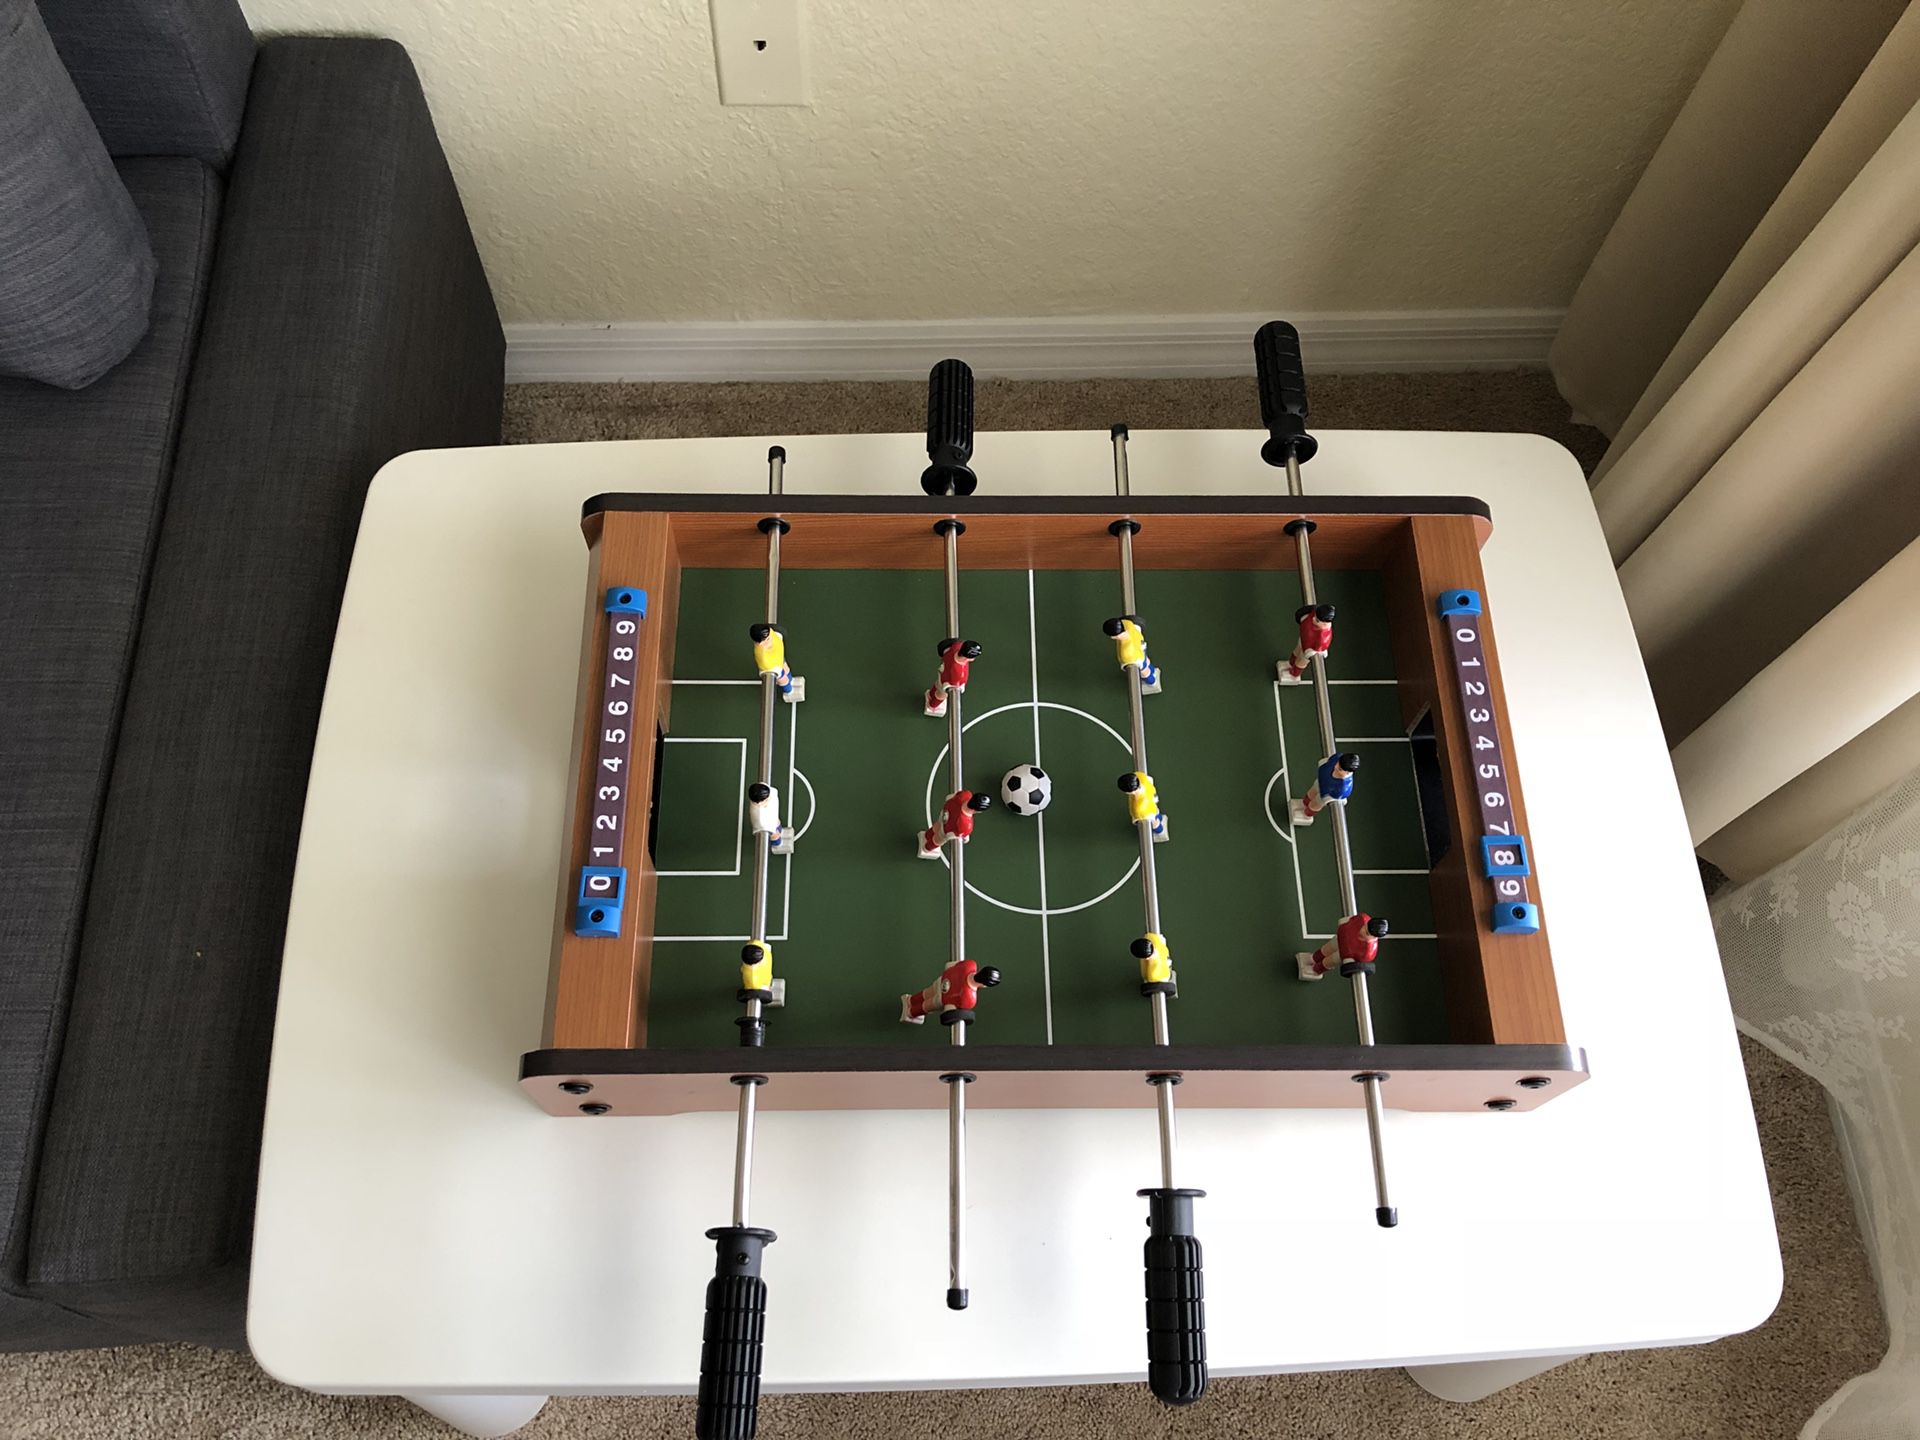 Tabletop Foosball Table- Portable Mini Table Football / Soccer Game Set with Two Balls and Score Keeper for Adults and Kids by Hey! Play!